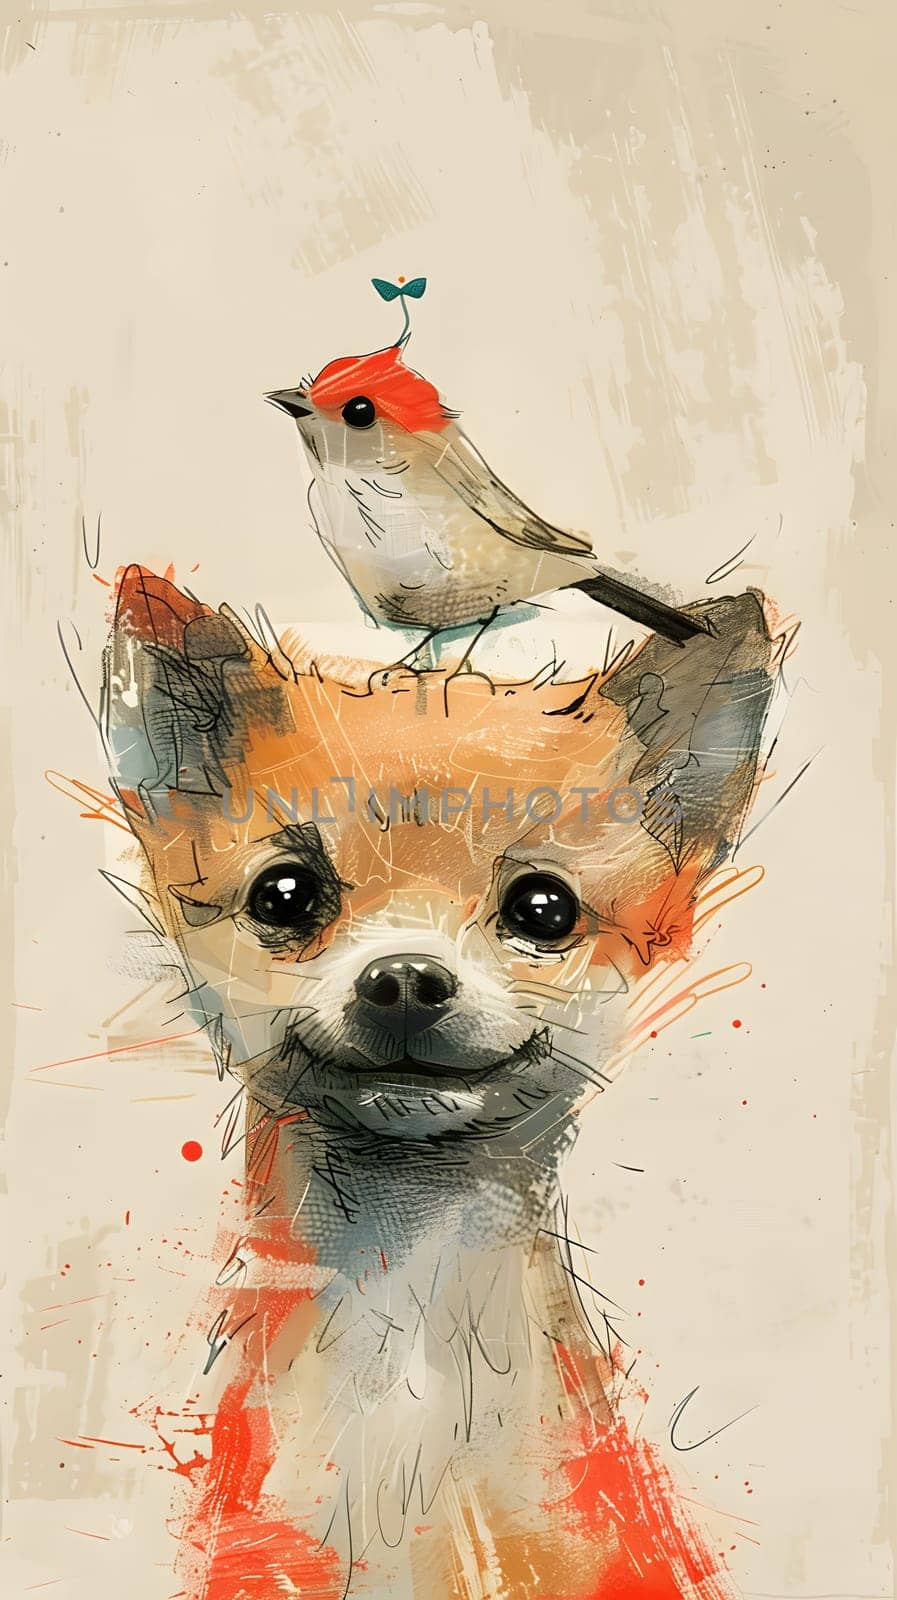 An art piece depicting a fawncolored dog with a bird perched on its head. The painting captures the whimsical scene with detailed whiskers and vivid colors